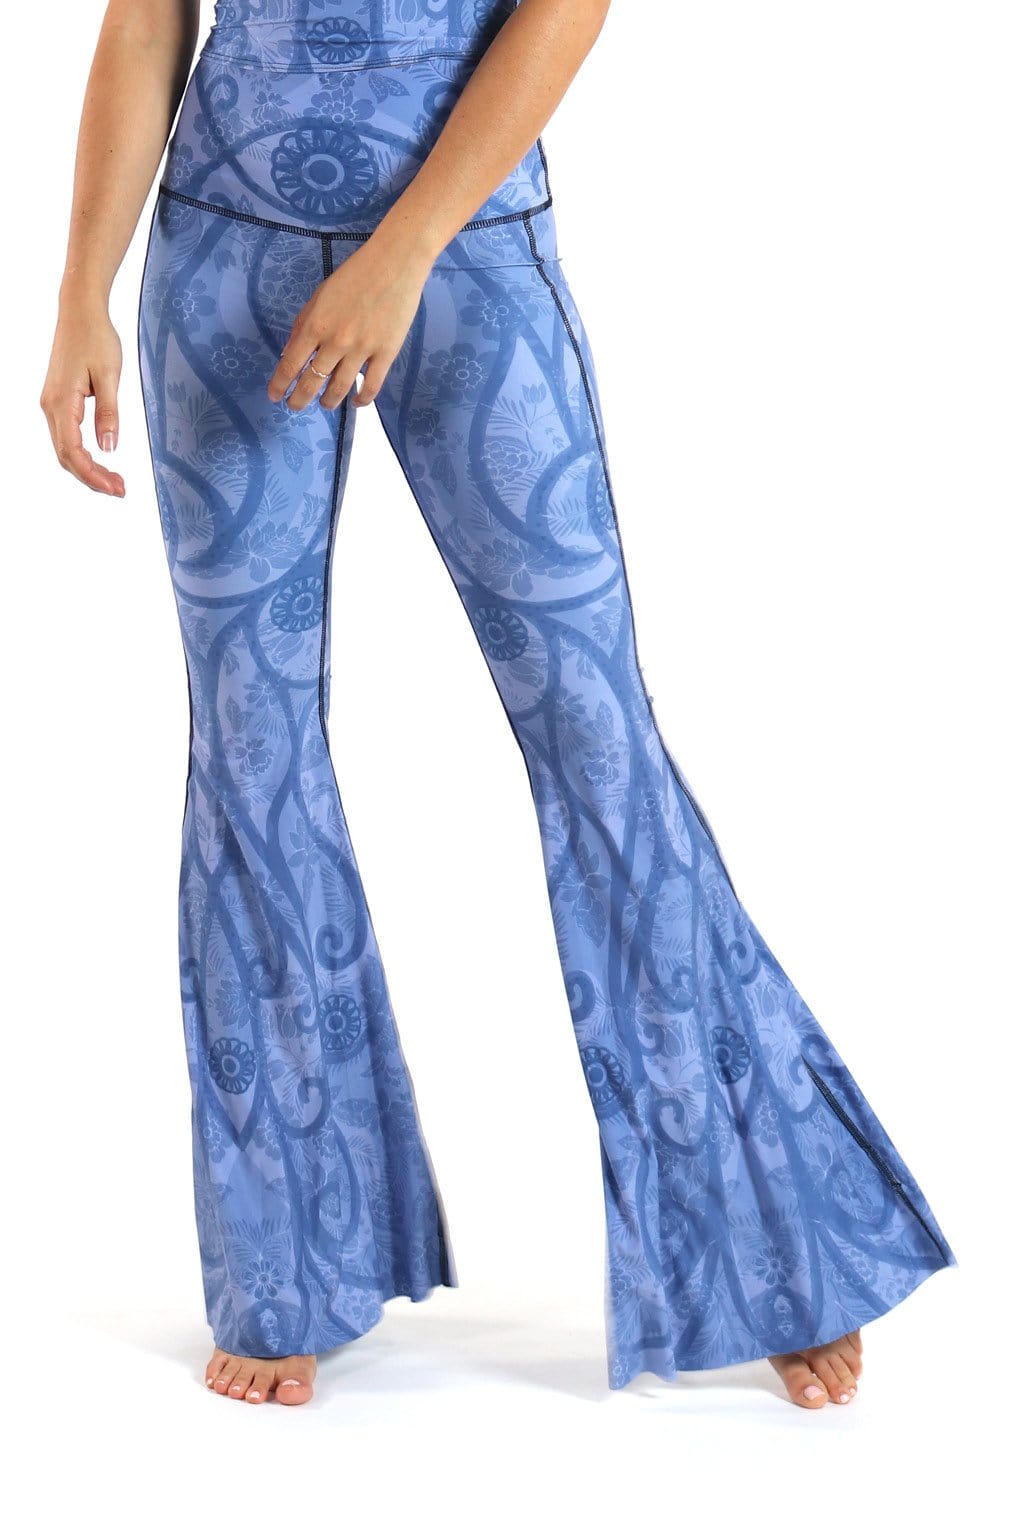 Peaceful Warrior Printed Bell Bottoms Front View